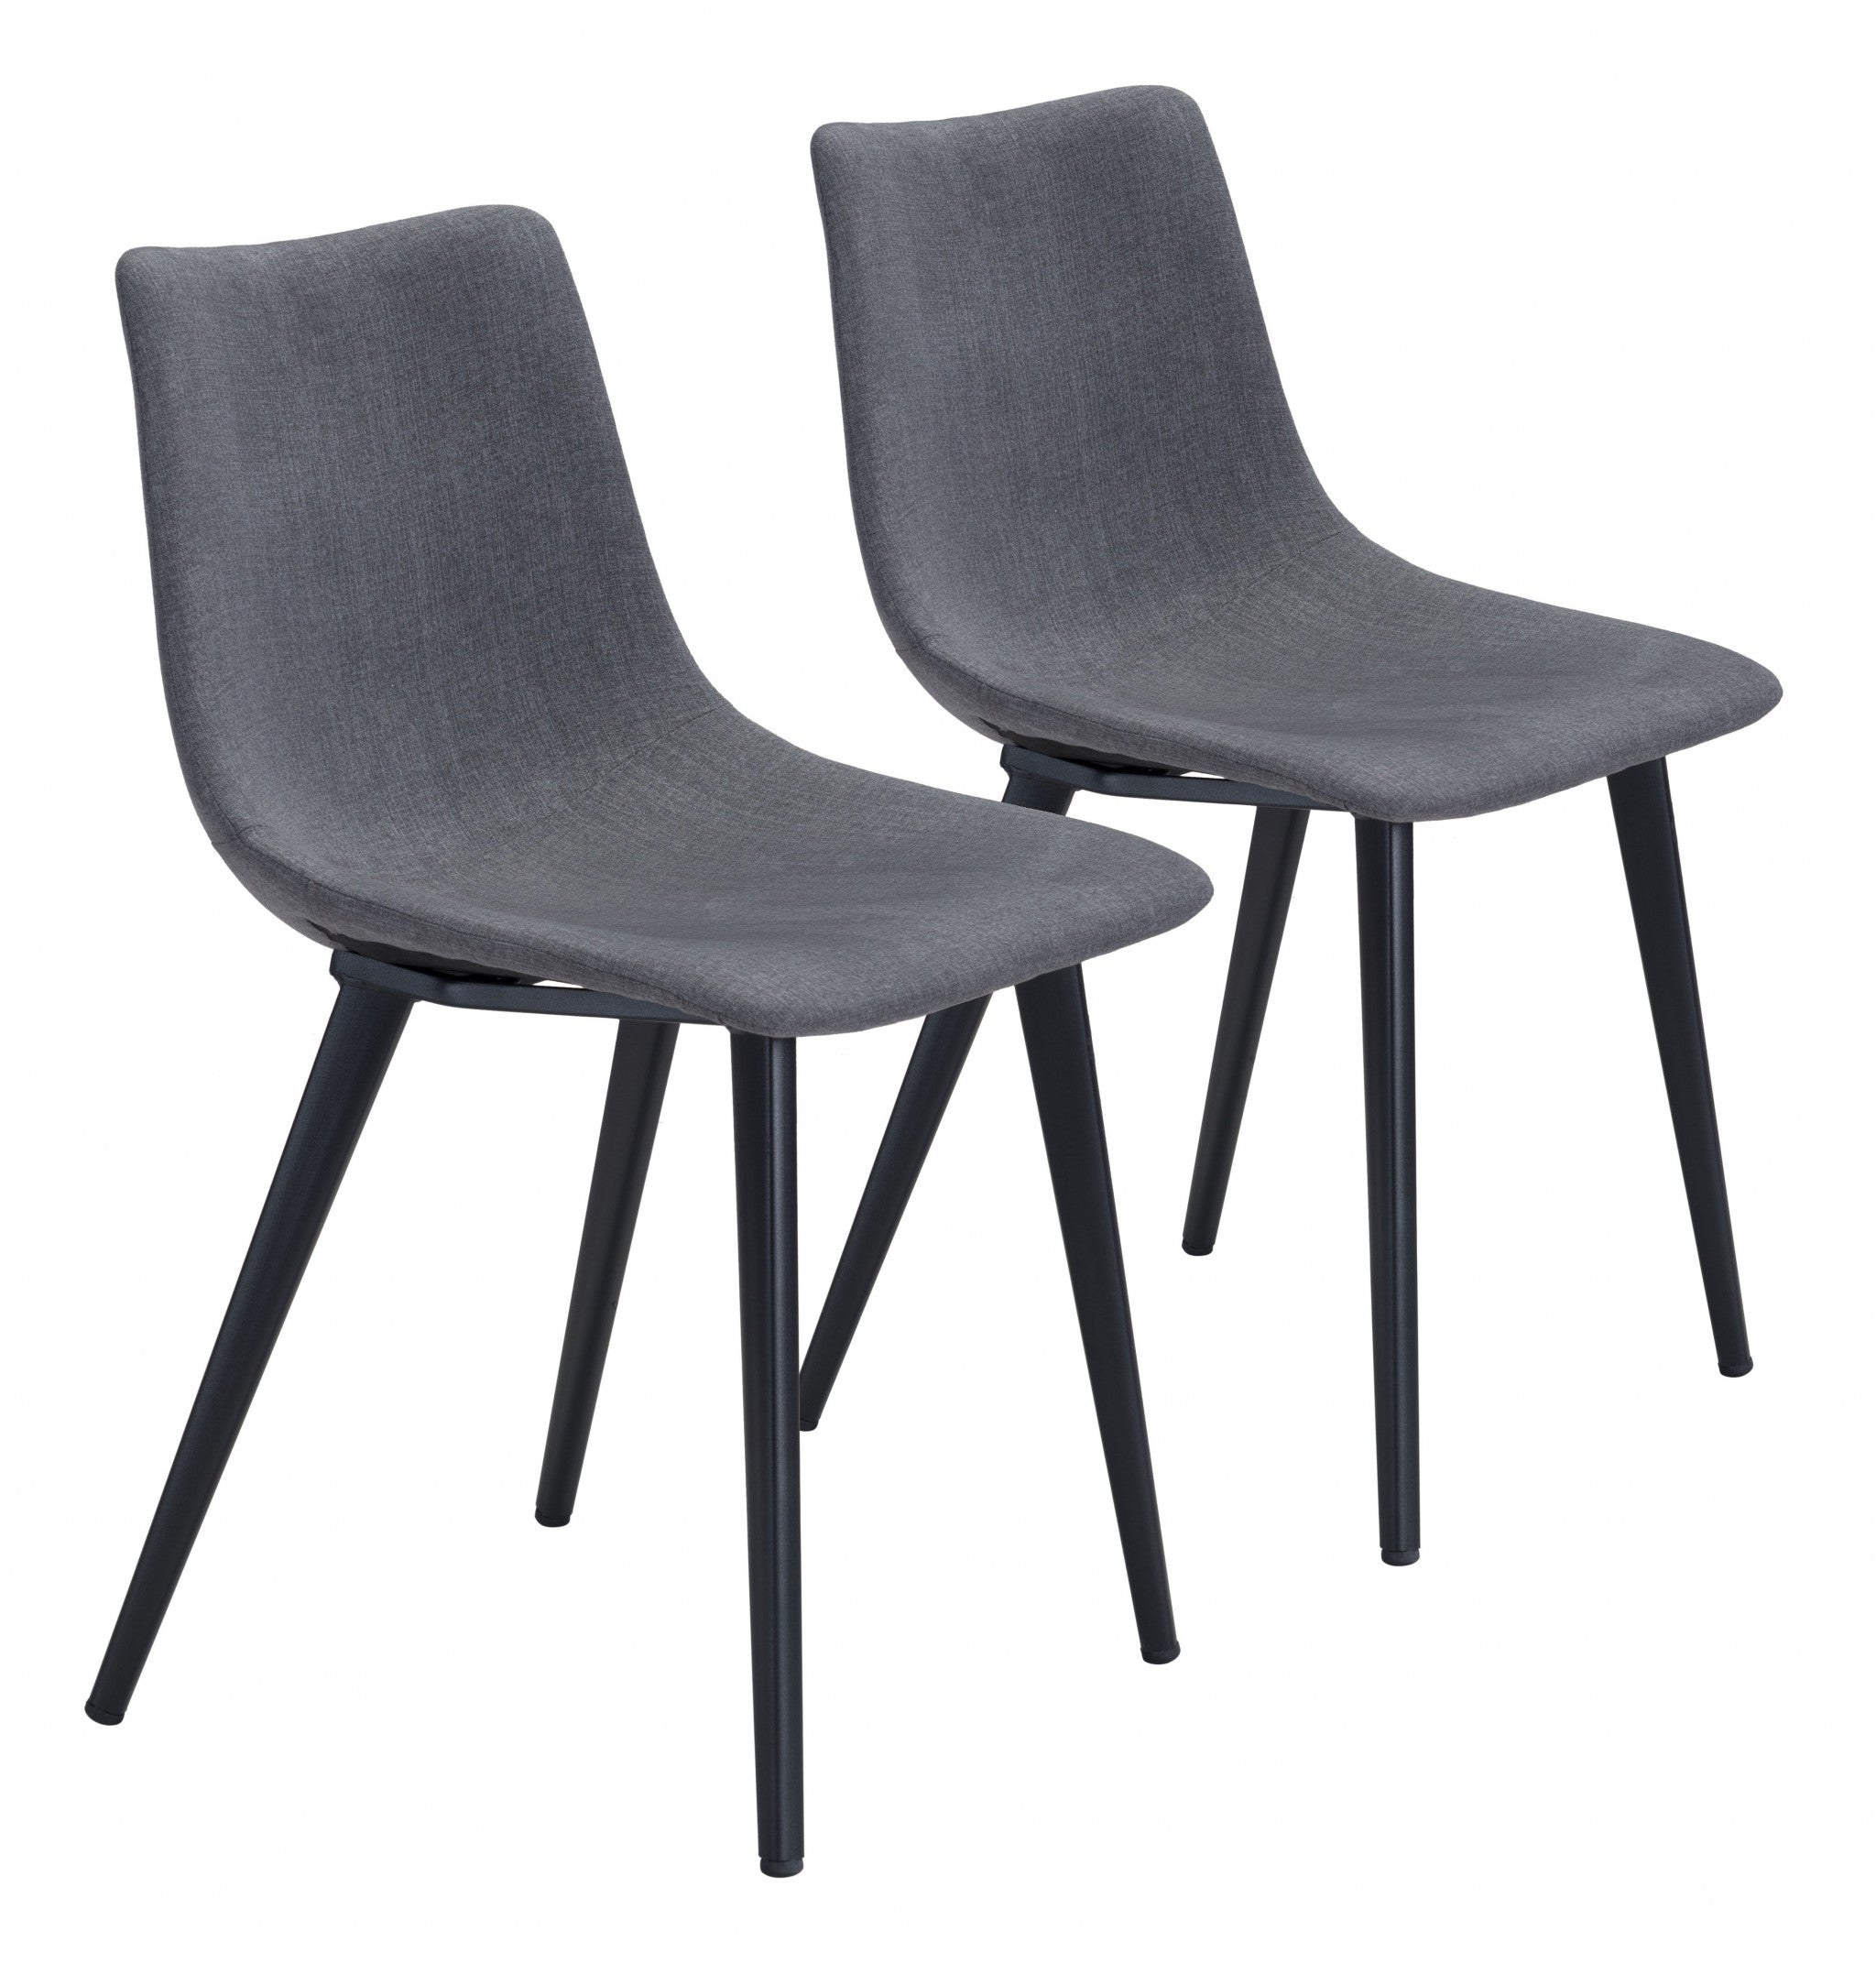 Set of Two Steel Gray and Black Slight Scoop Dining Chairs